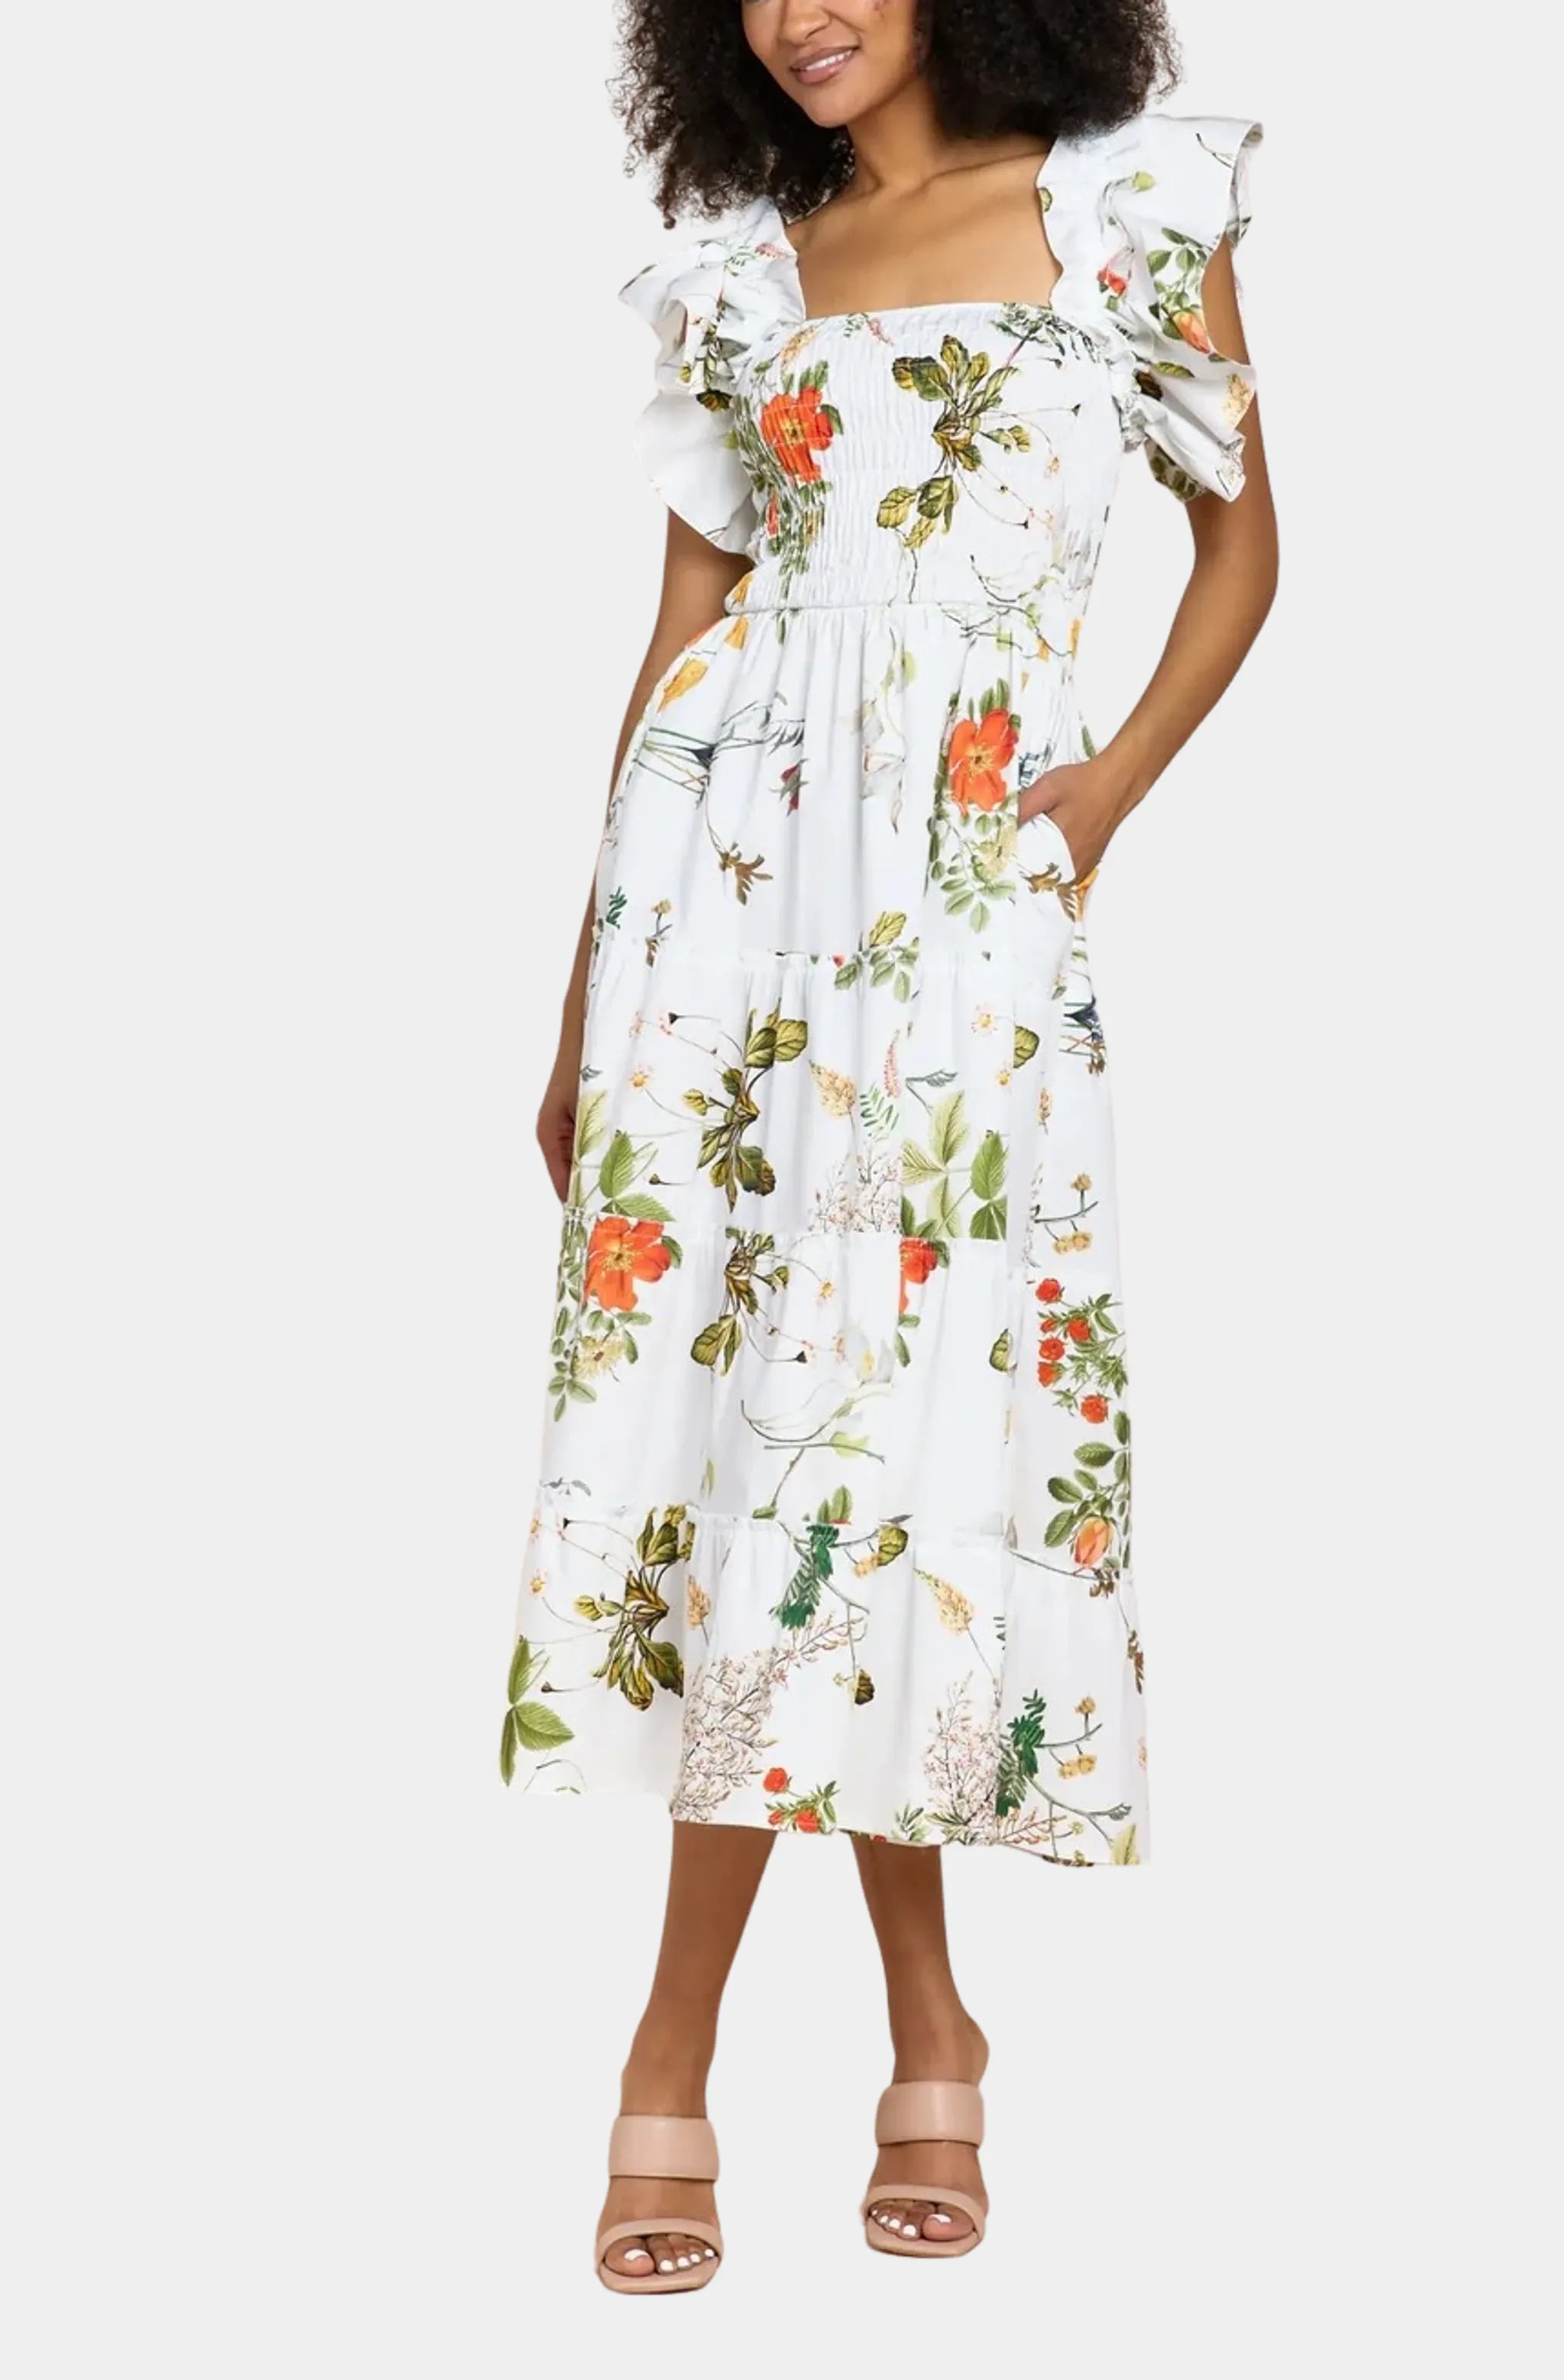 24 Floral Dresses That Are Cute And Comfortable